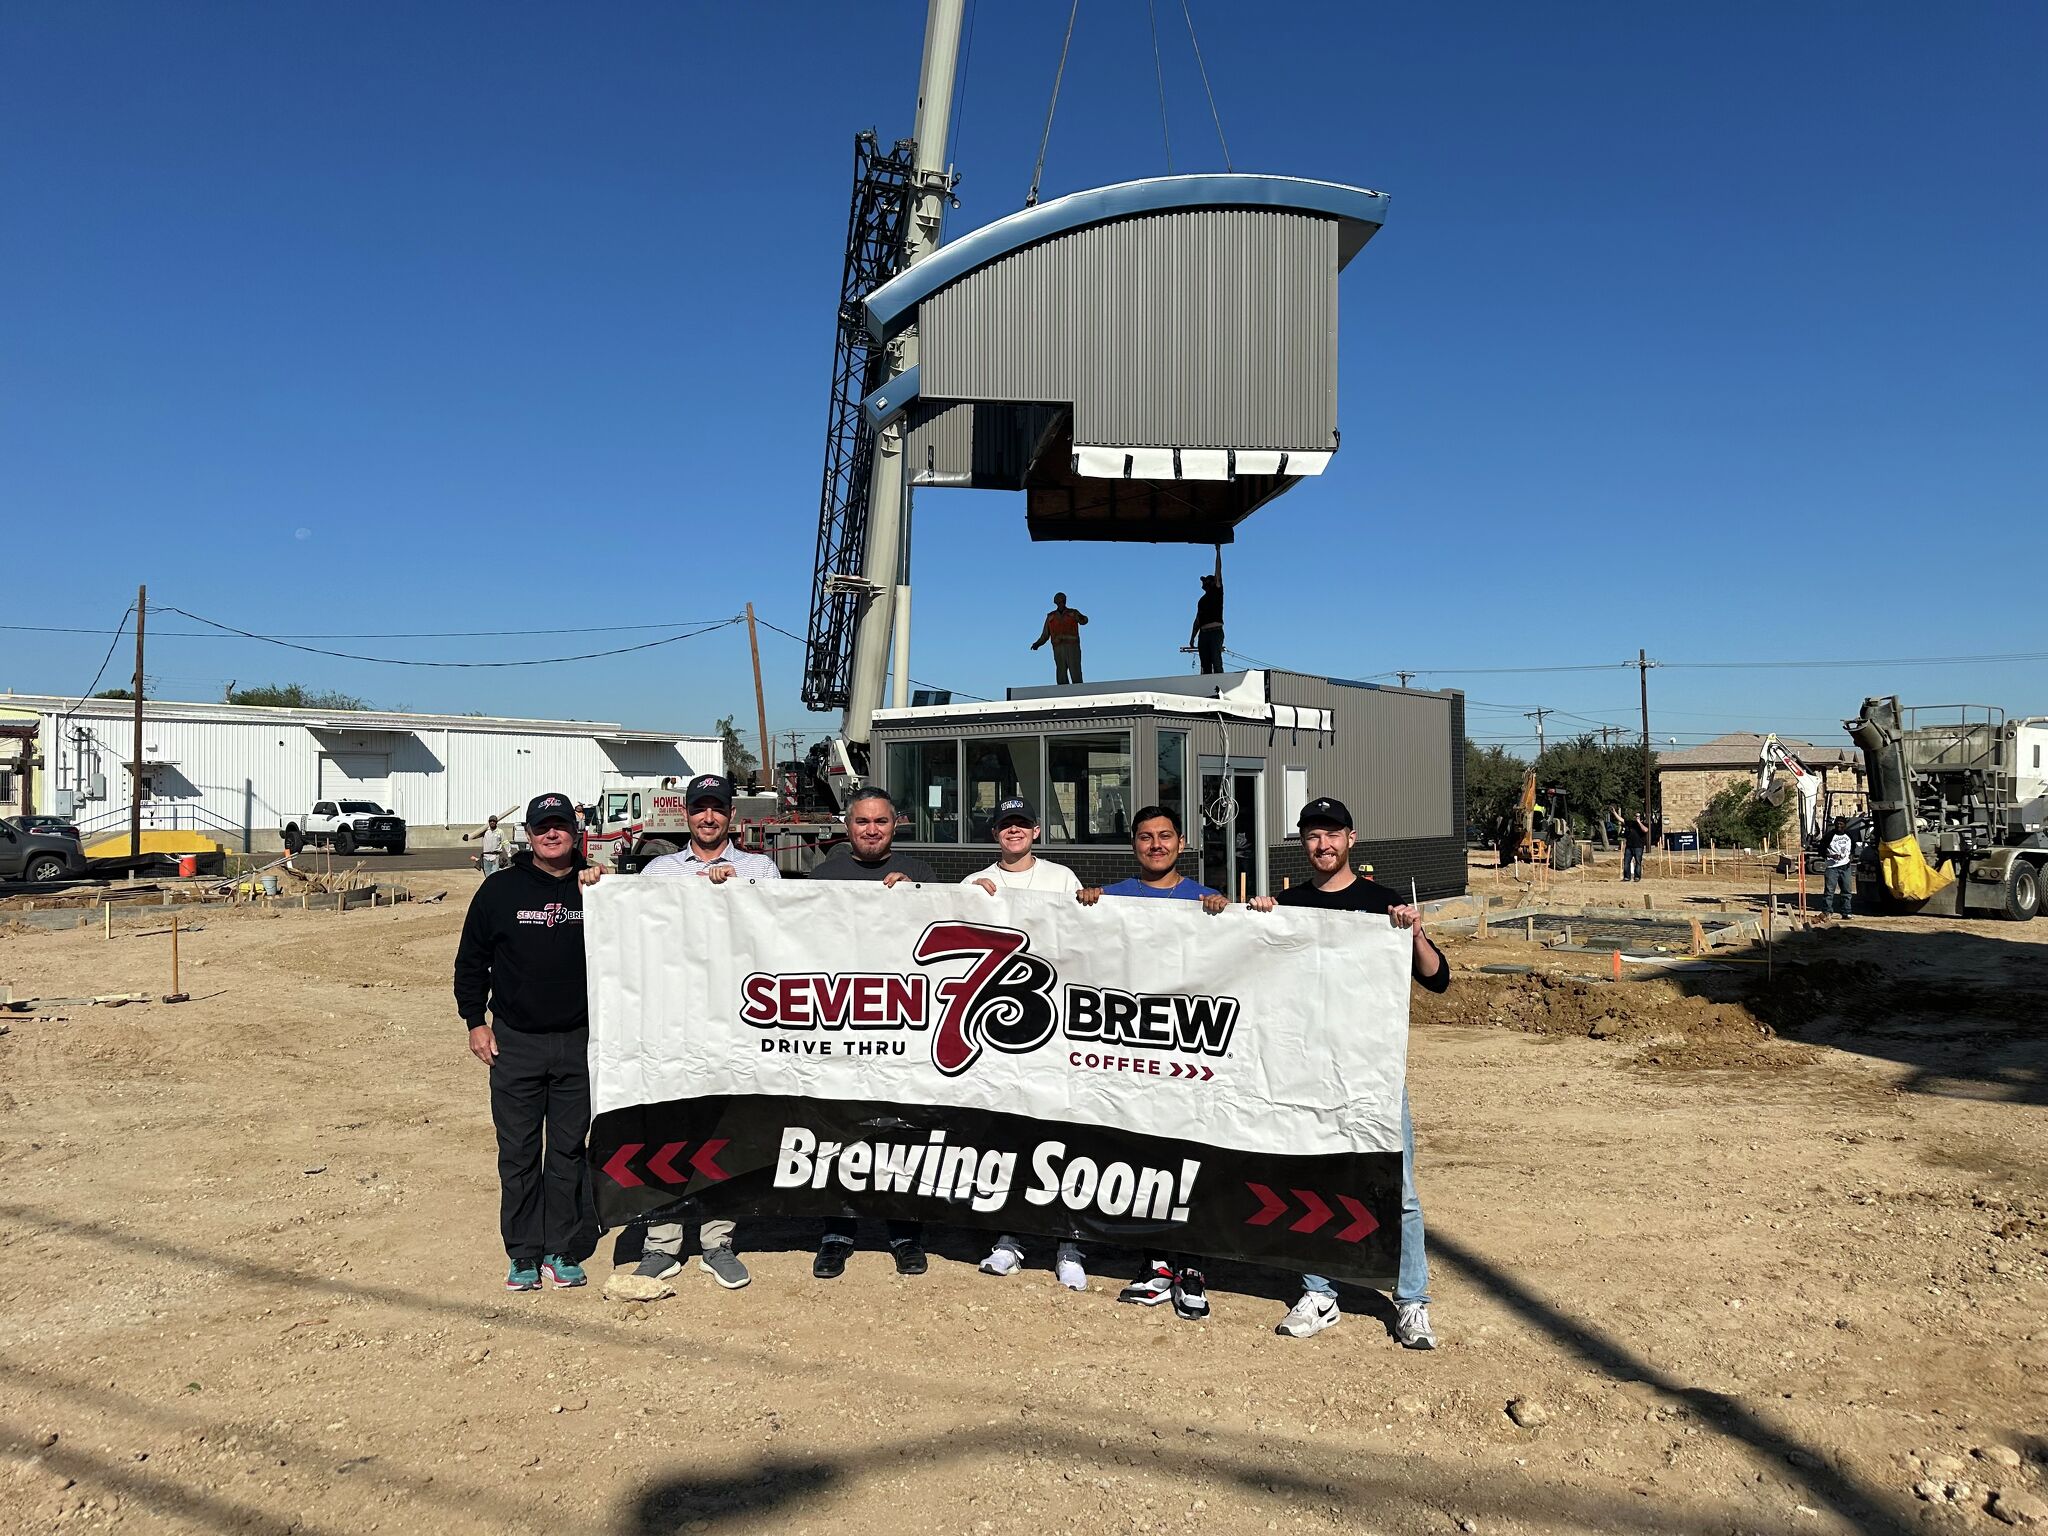 The 7 Brew Coffee building confirms its second Laredo location